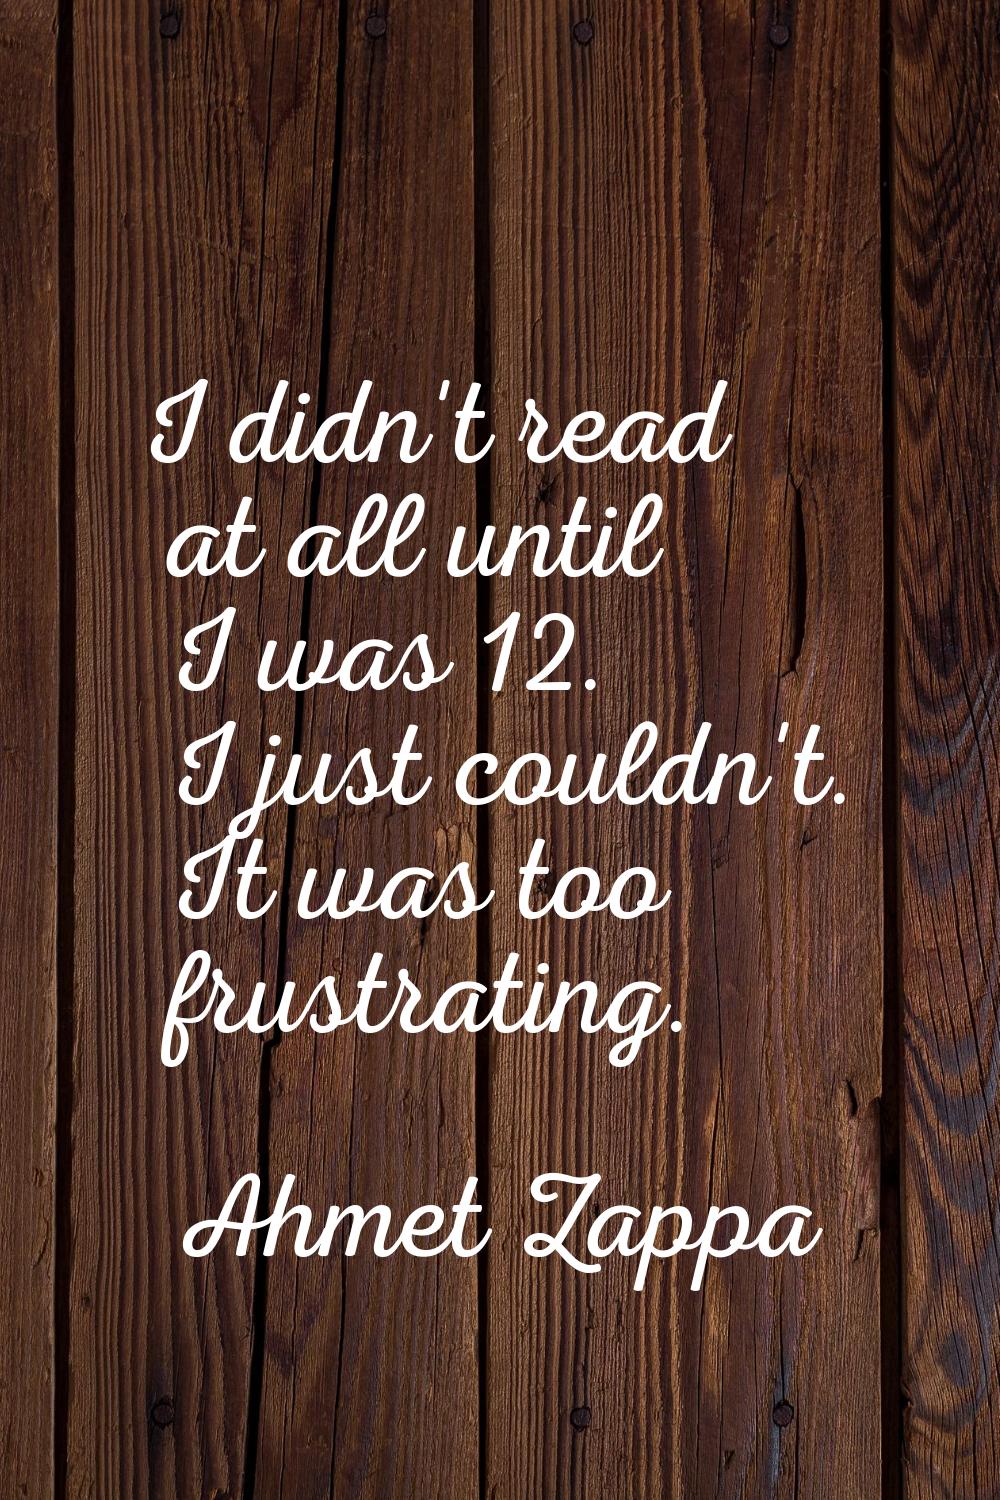 I didn't read at all until I was 12. I just couldn't. It was too frustrating.